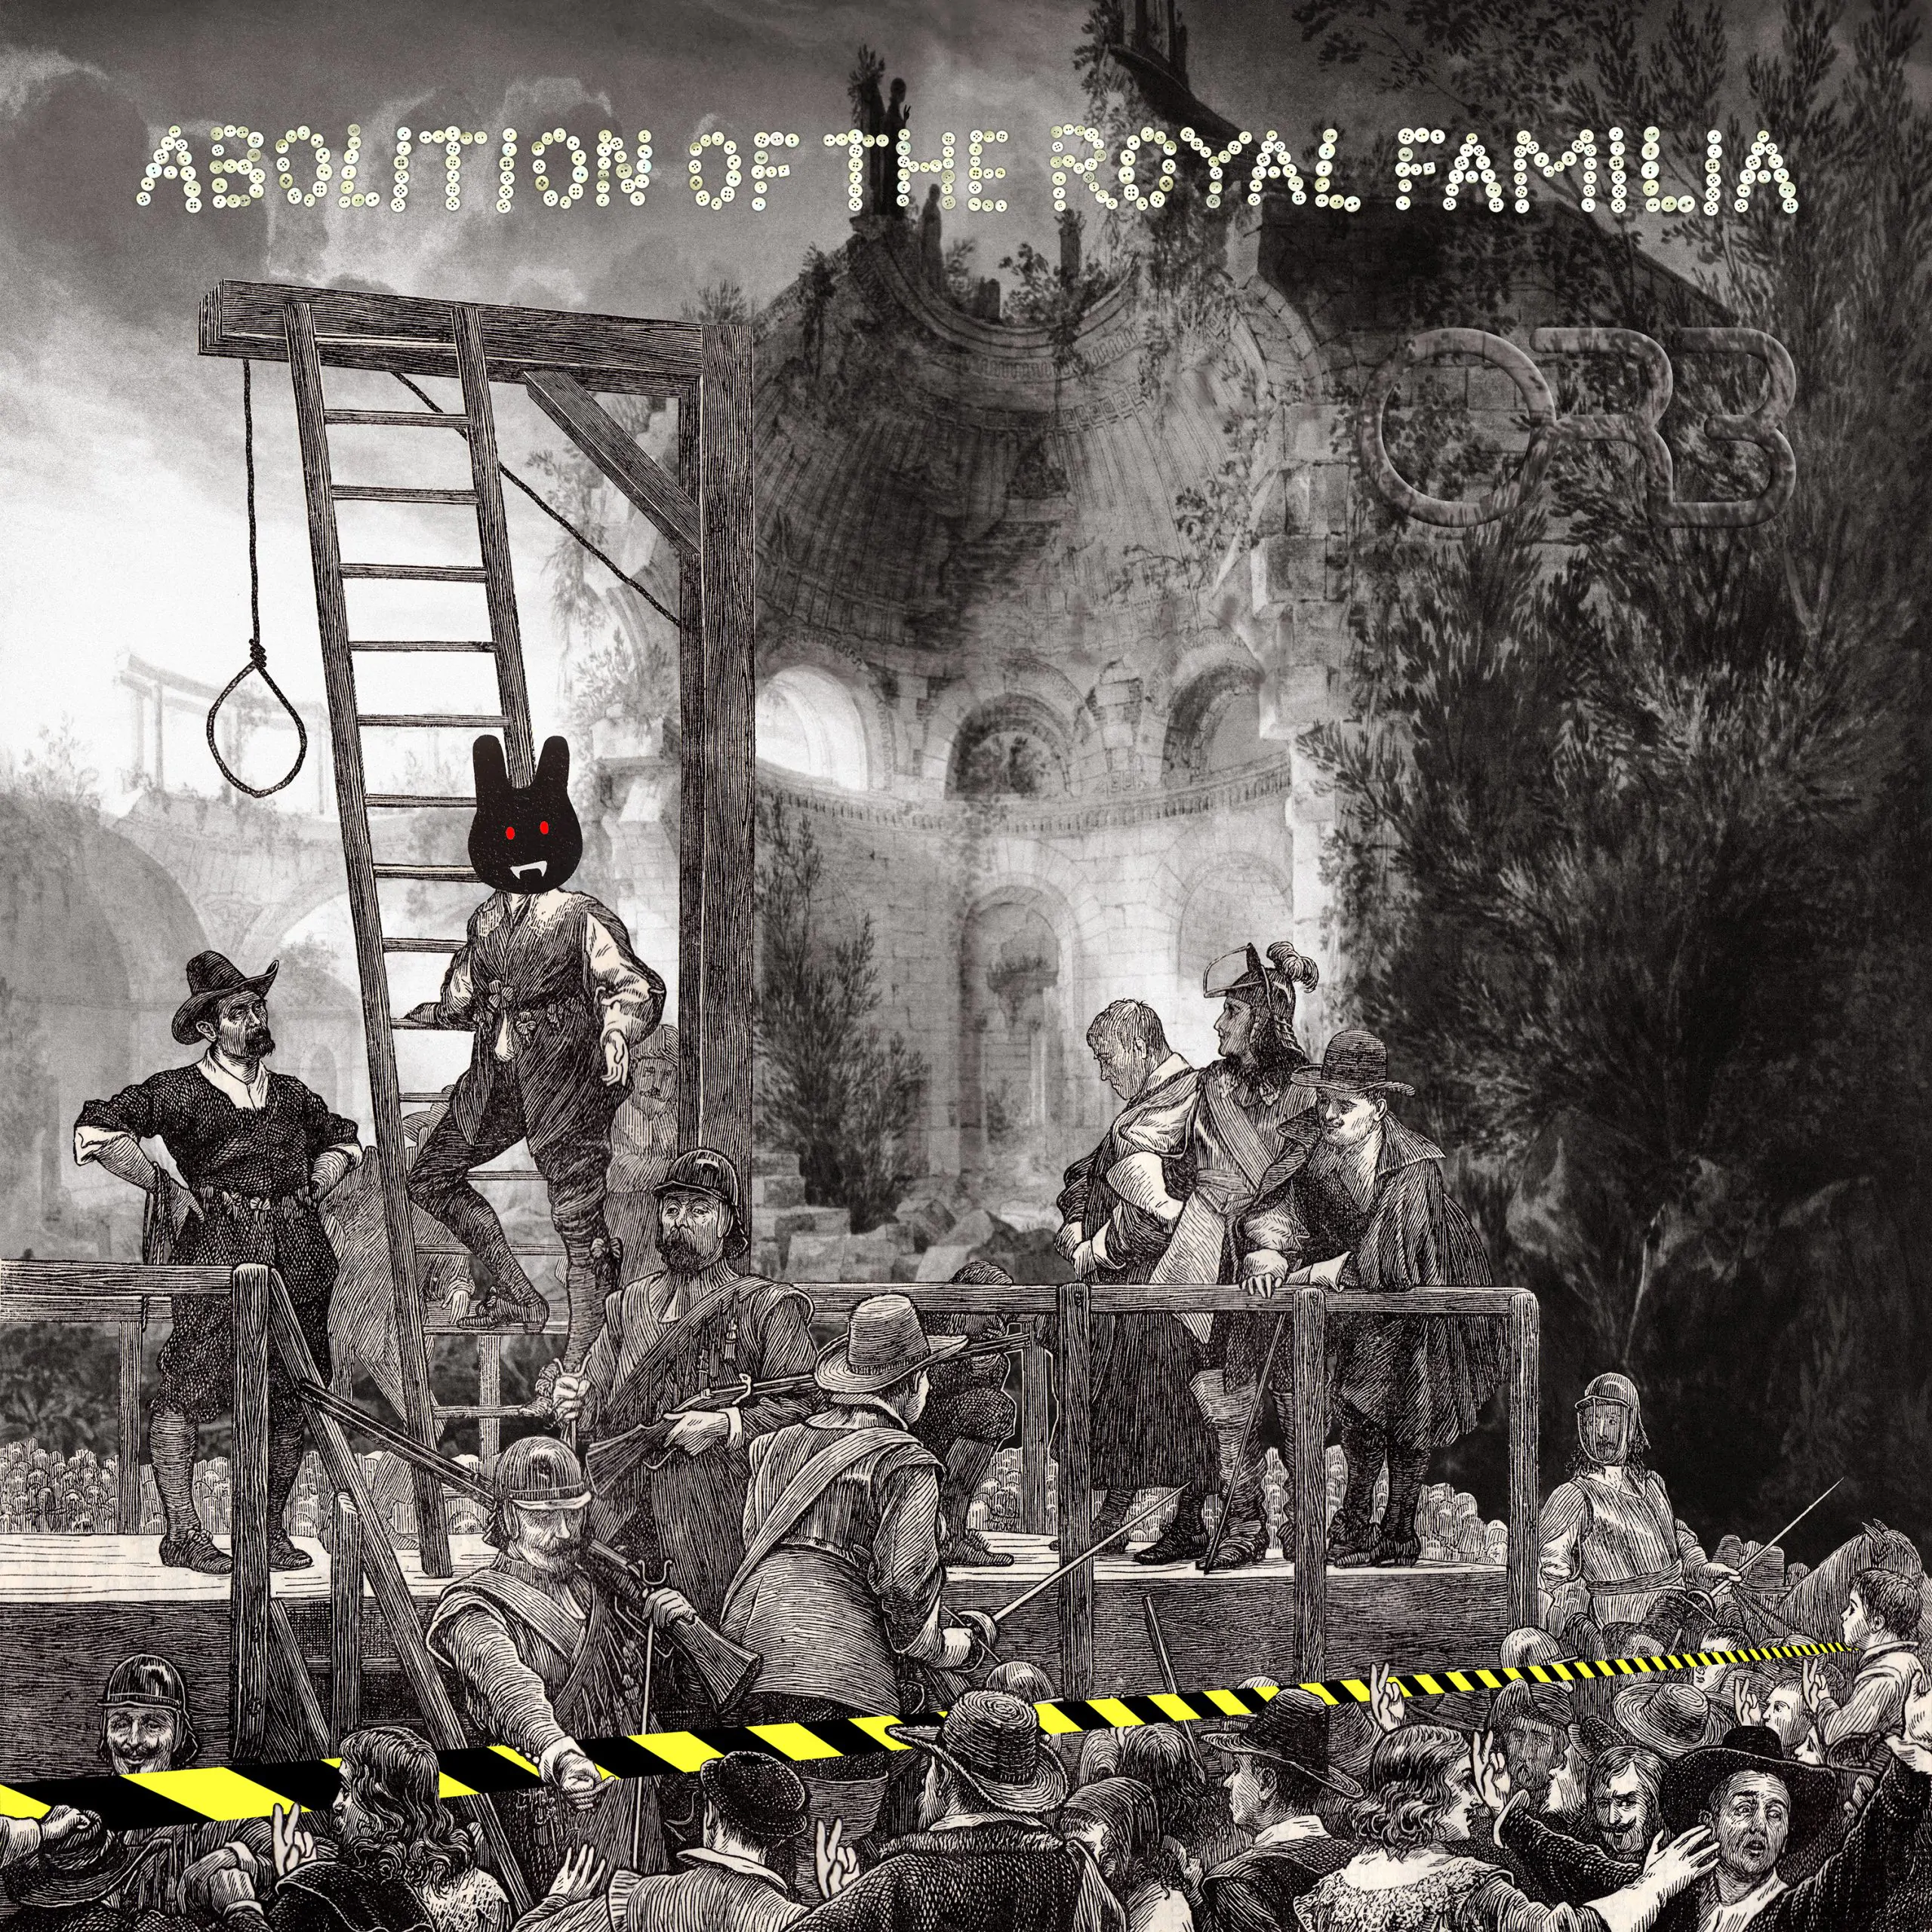 ALBUM REVIEW: The Orb – Abolition Of The Royal Familia